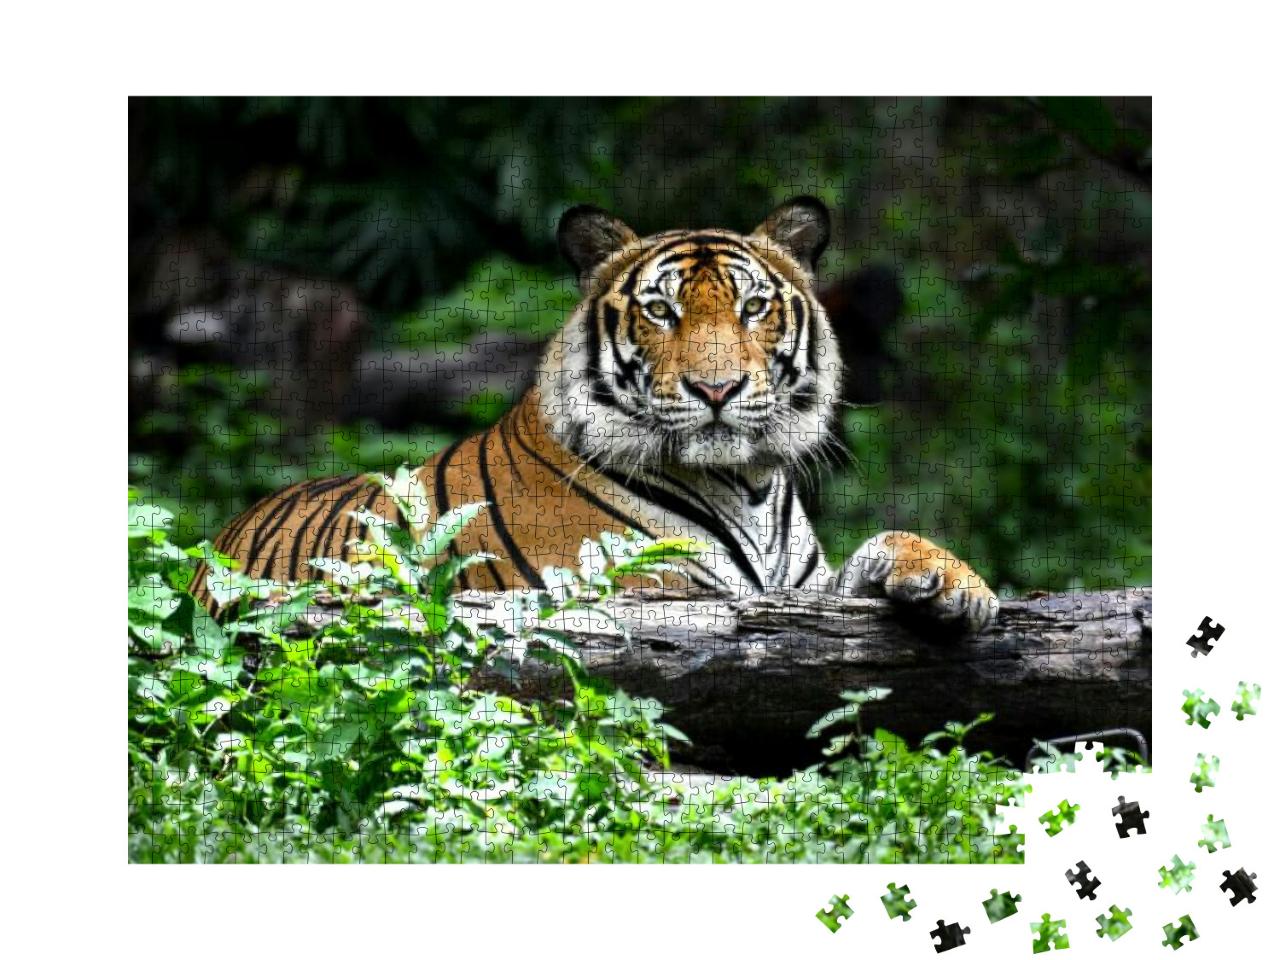 Bengal Tiger in Forest Show Head & Leg... Jigsaw Puzzle with 1000 pieces